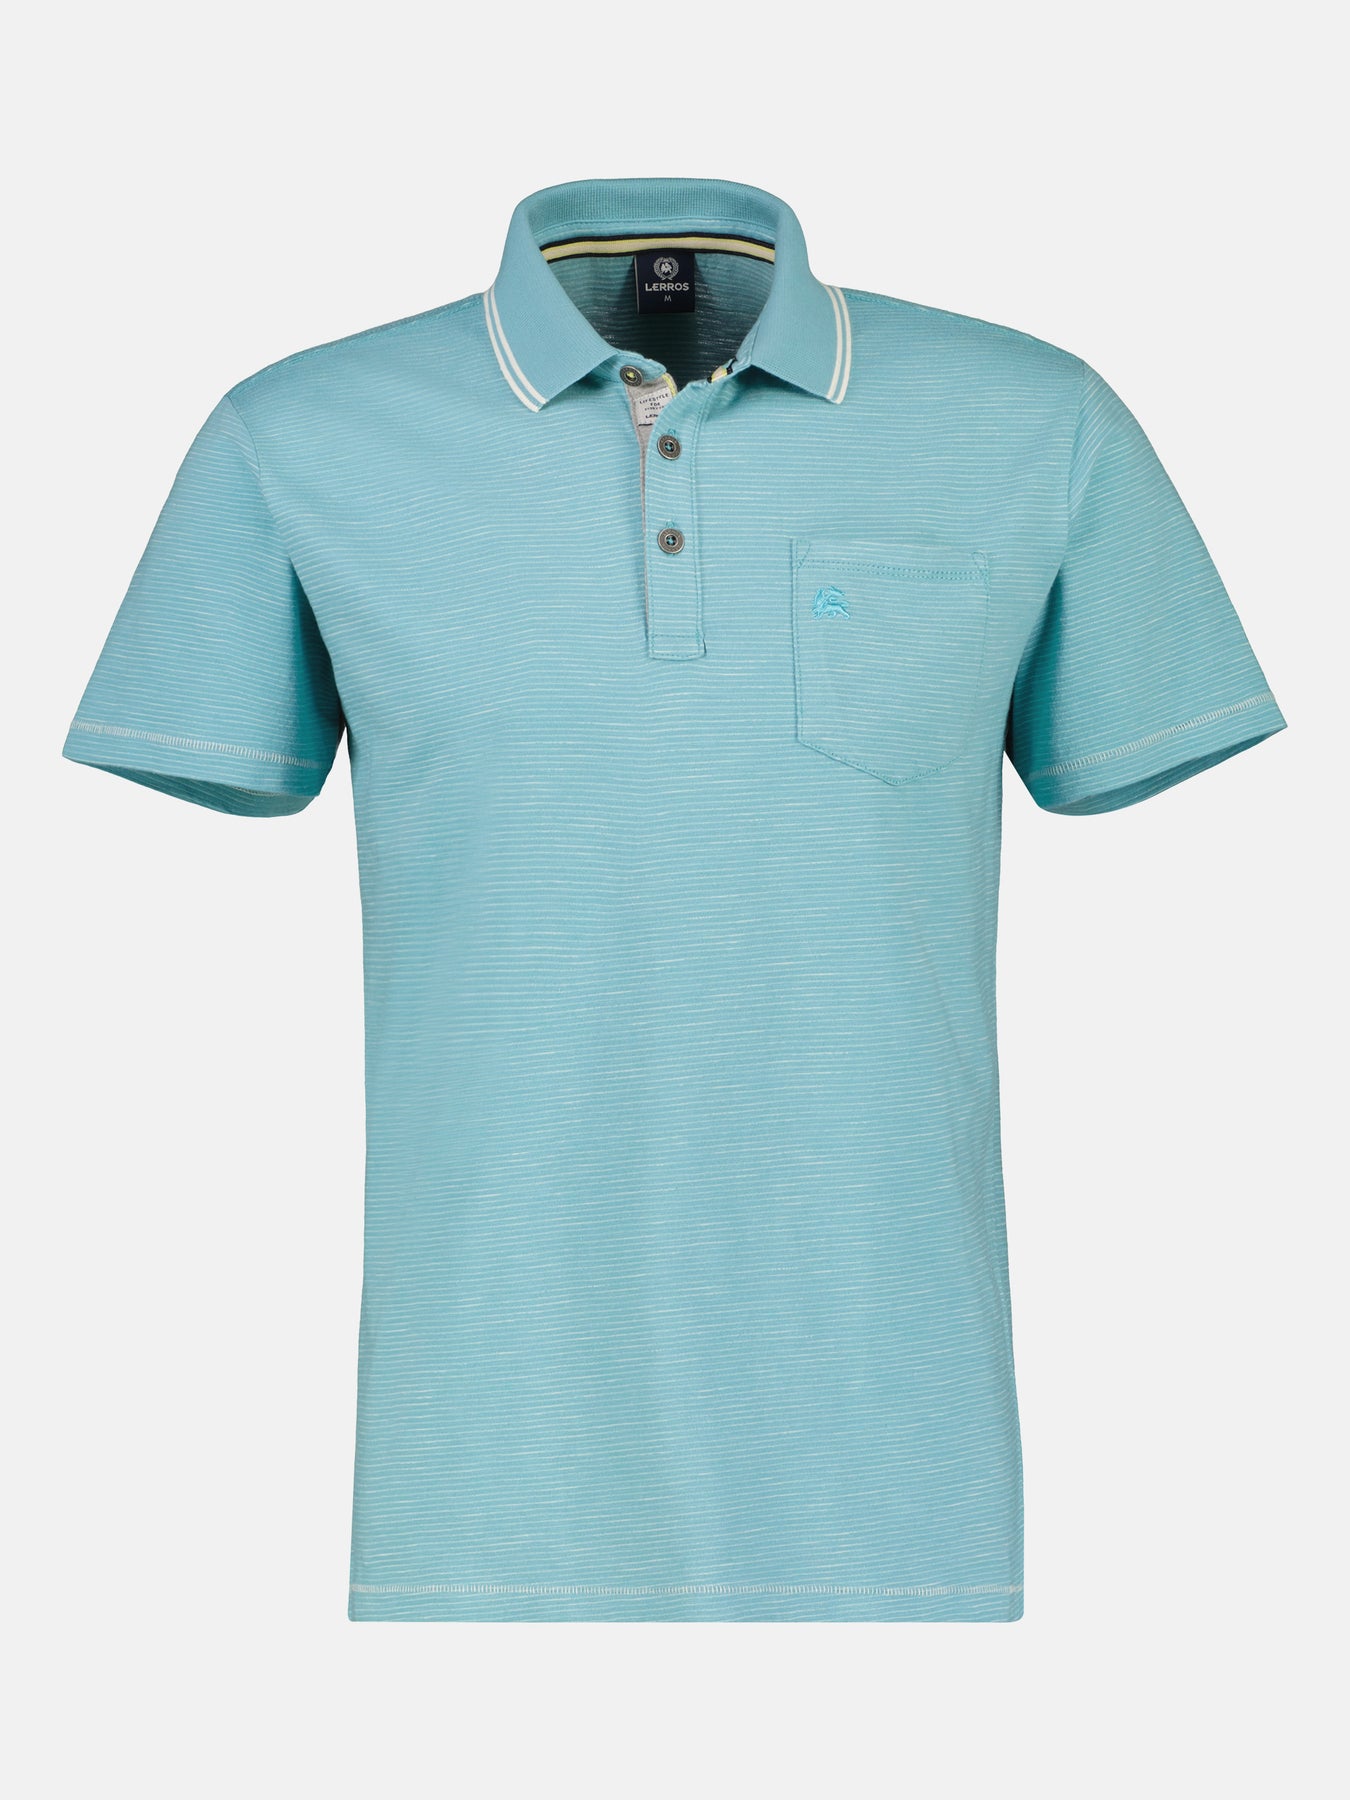 Polo shirt with – SHOP LERROS fineliner stripes